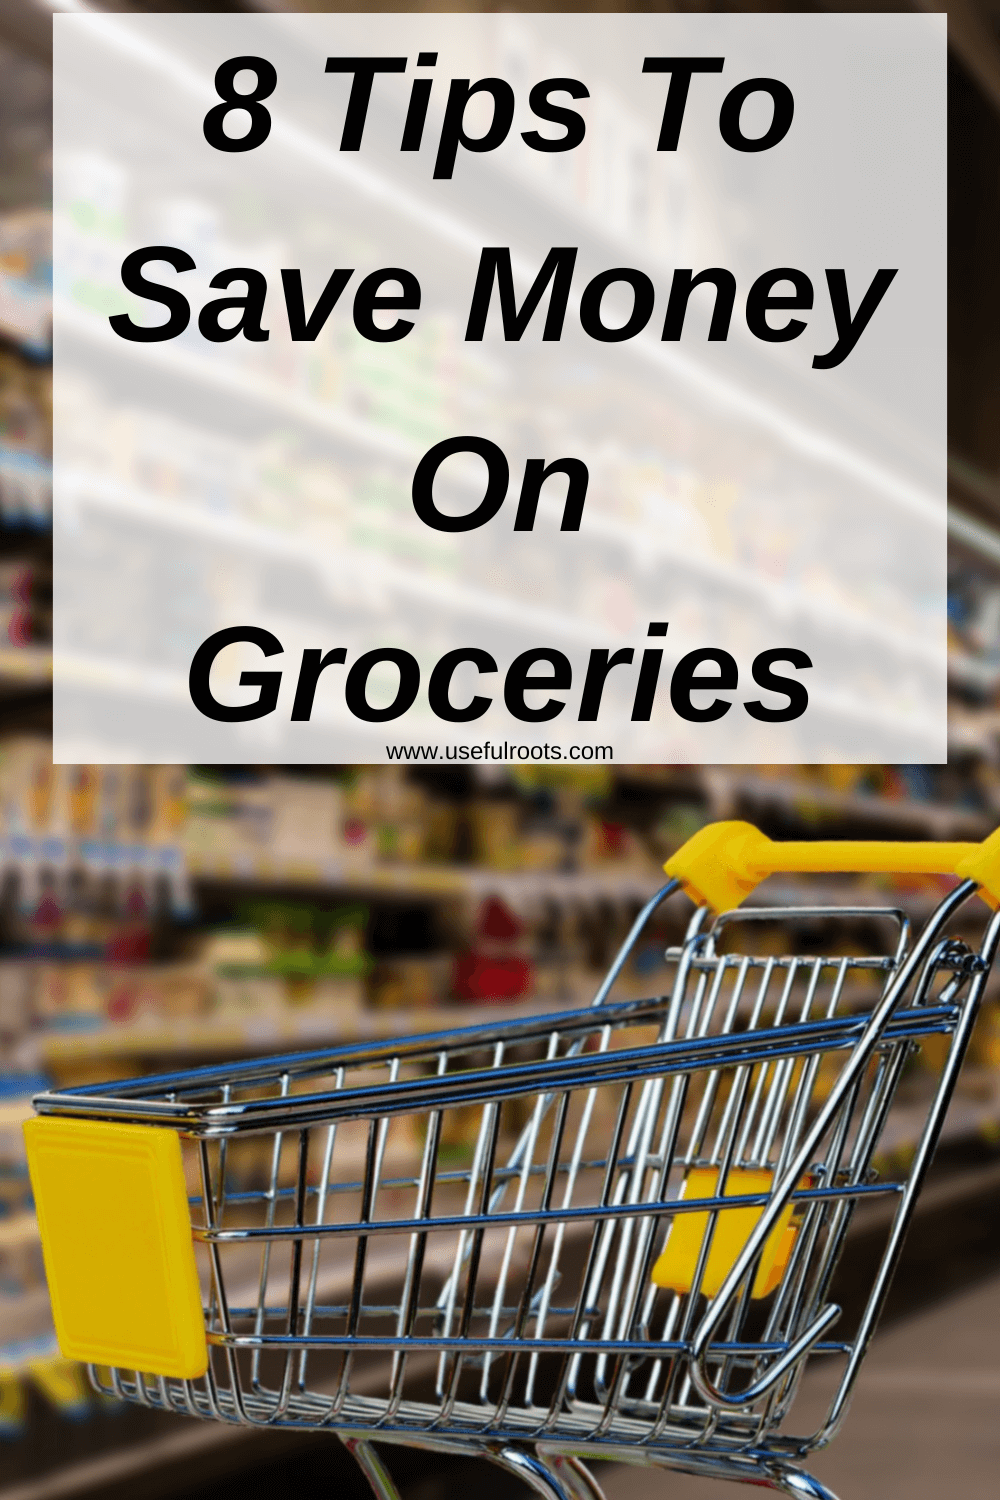 Save money shopping - Buy  versions of popular products